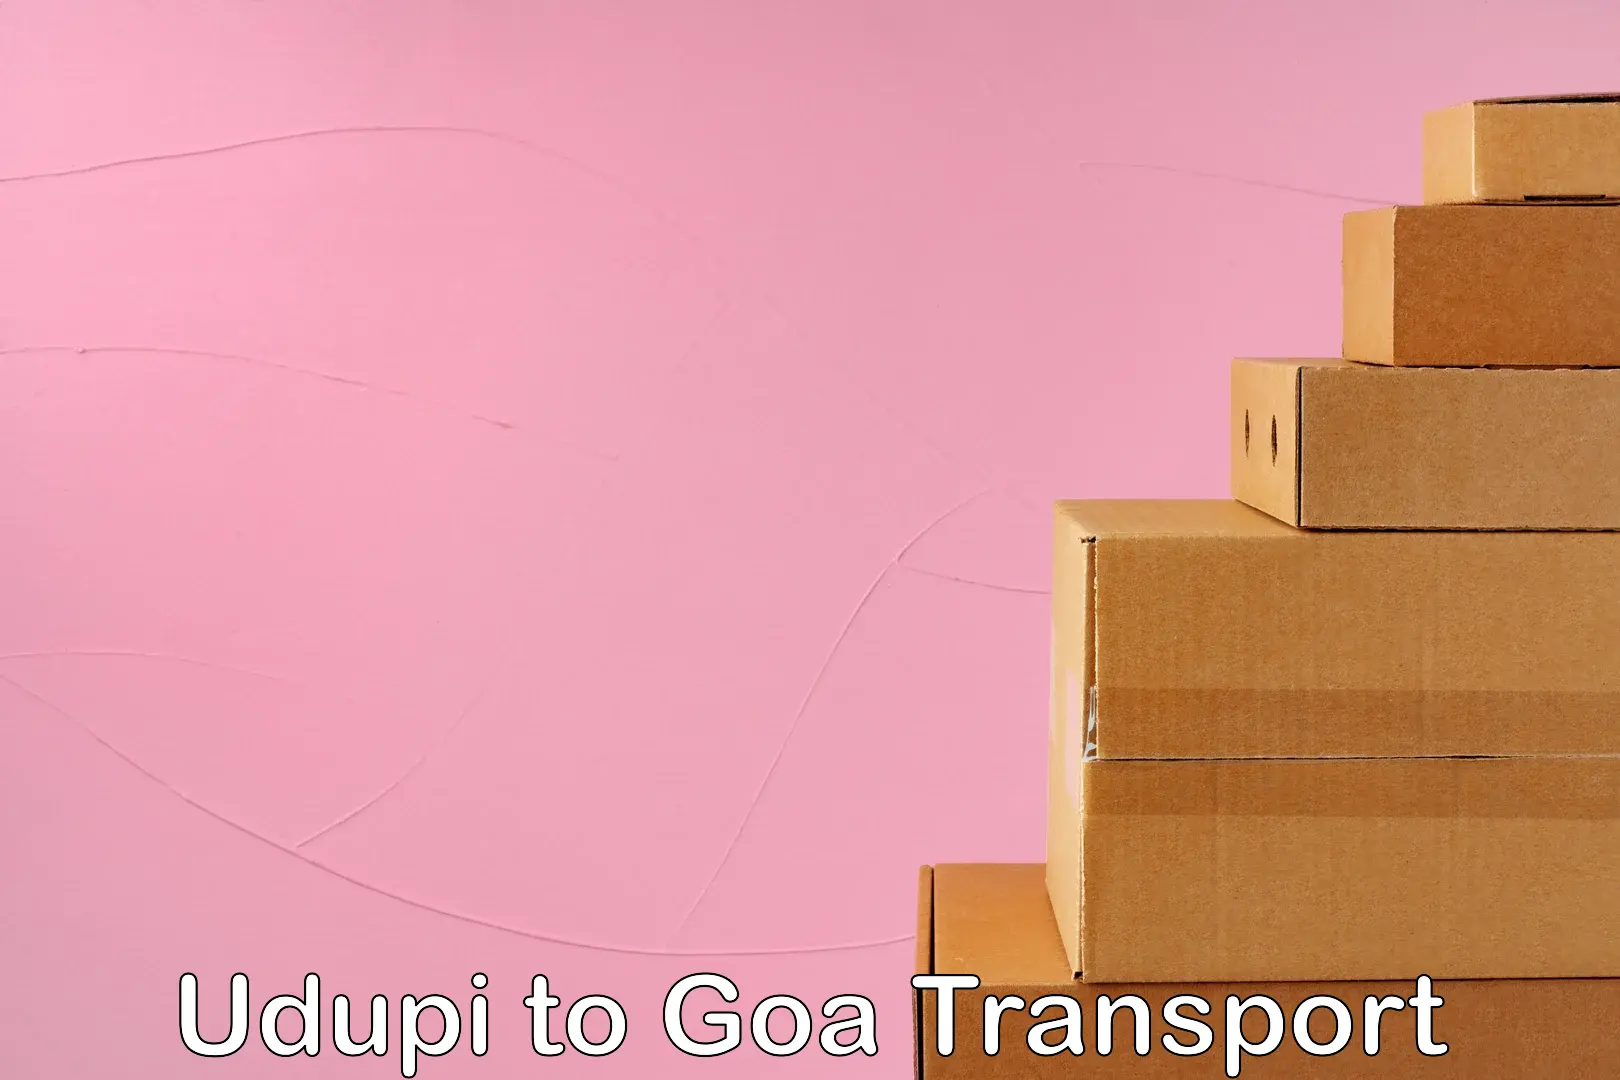 Transport in sharing Udupi to South Goa